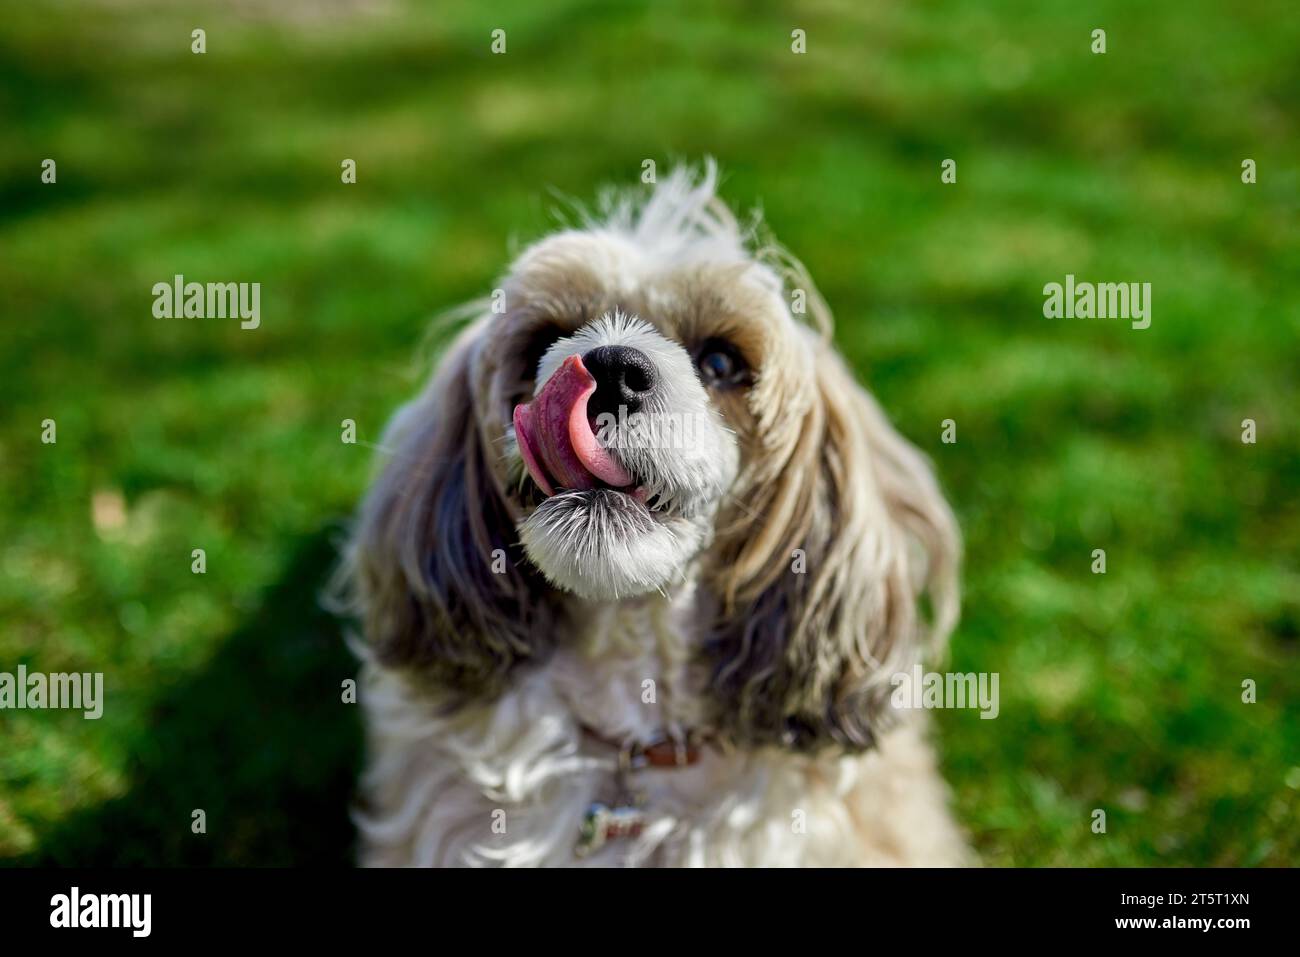 Playful Chinese crested powder puff dog licking its nose while lying on grass. Canine companionship, four-legged friend. Image for dog adoption campai Stock Photo